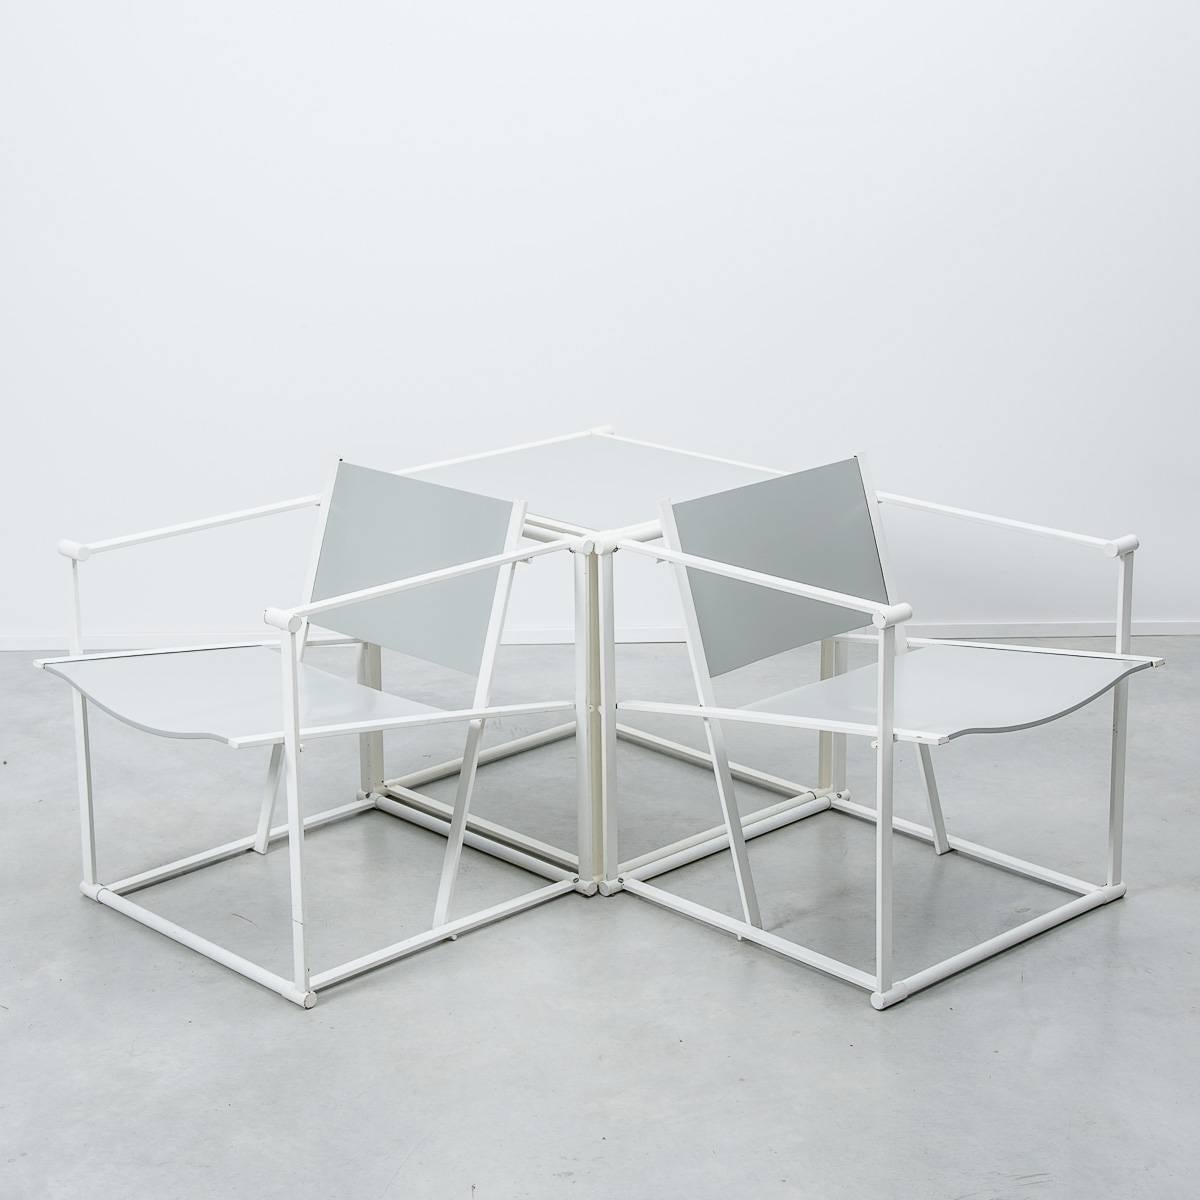 These two geometric chairs were designed by Radboud Van Beekum and manufactured by UMS Pastoe. They are constructed from white folded steel with grey powder coated ply seating. Following in the tradition of the De Stijl movement, the FM60 series is